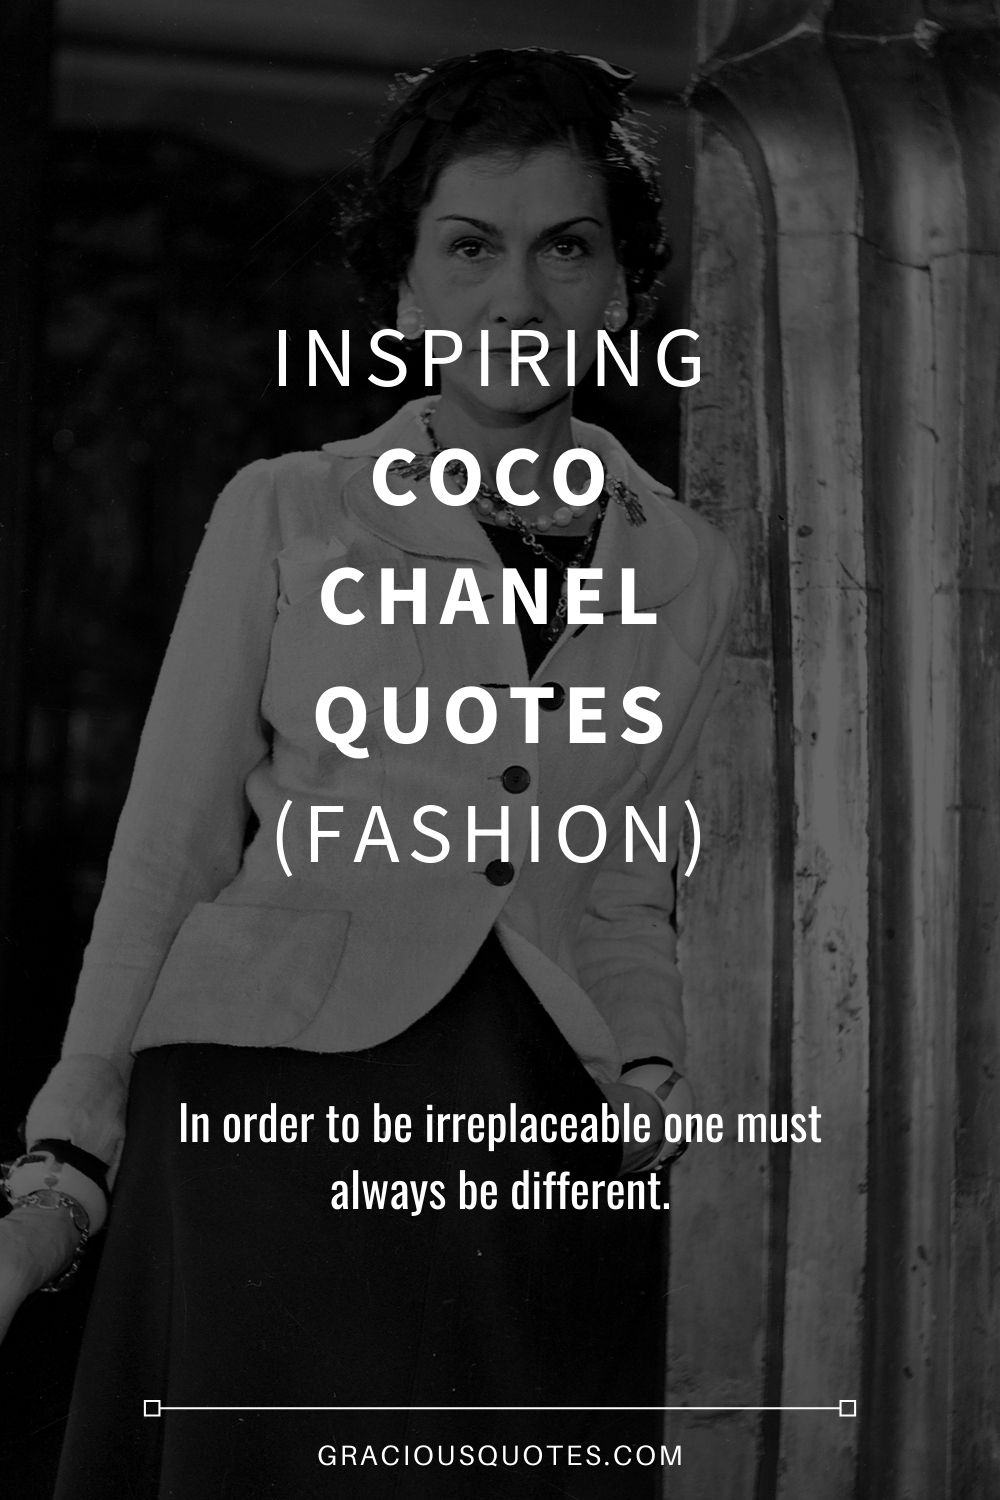 Inspiring Coco Chanel Quotes (FASHION) - Gracious Quotes